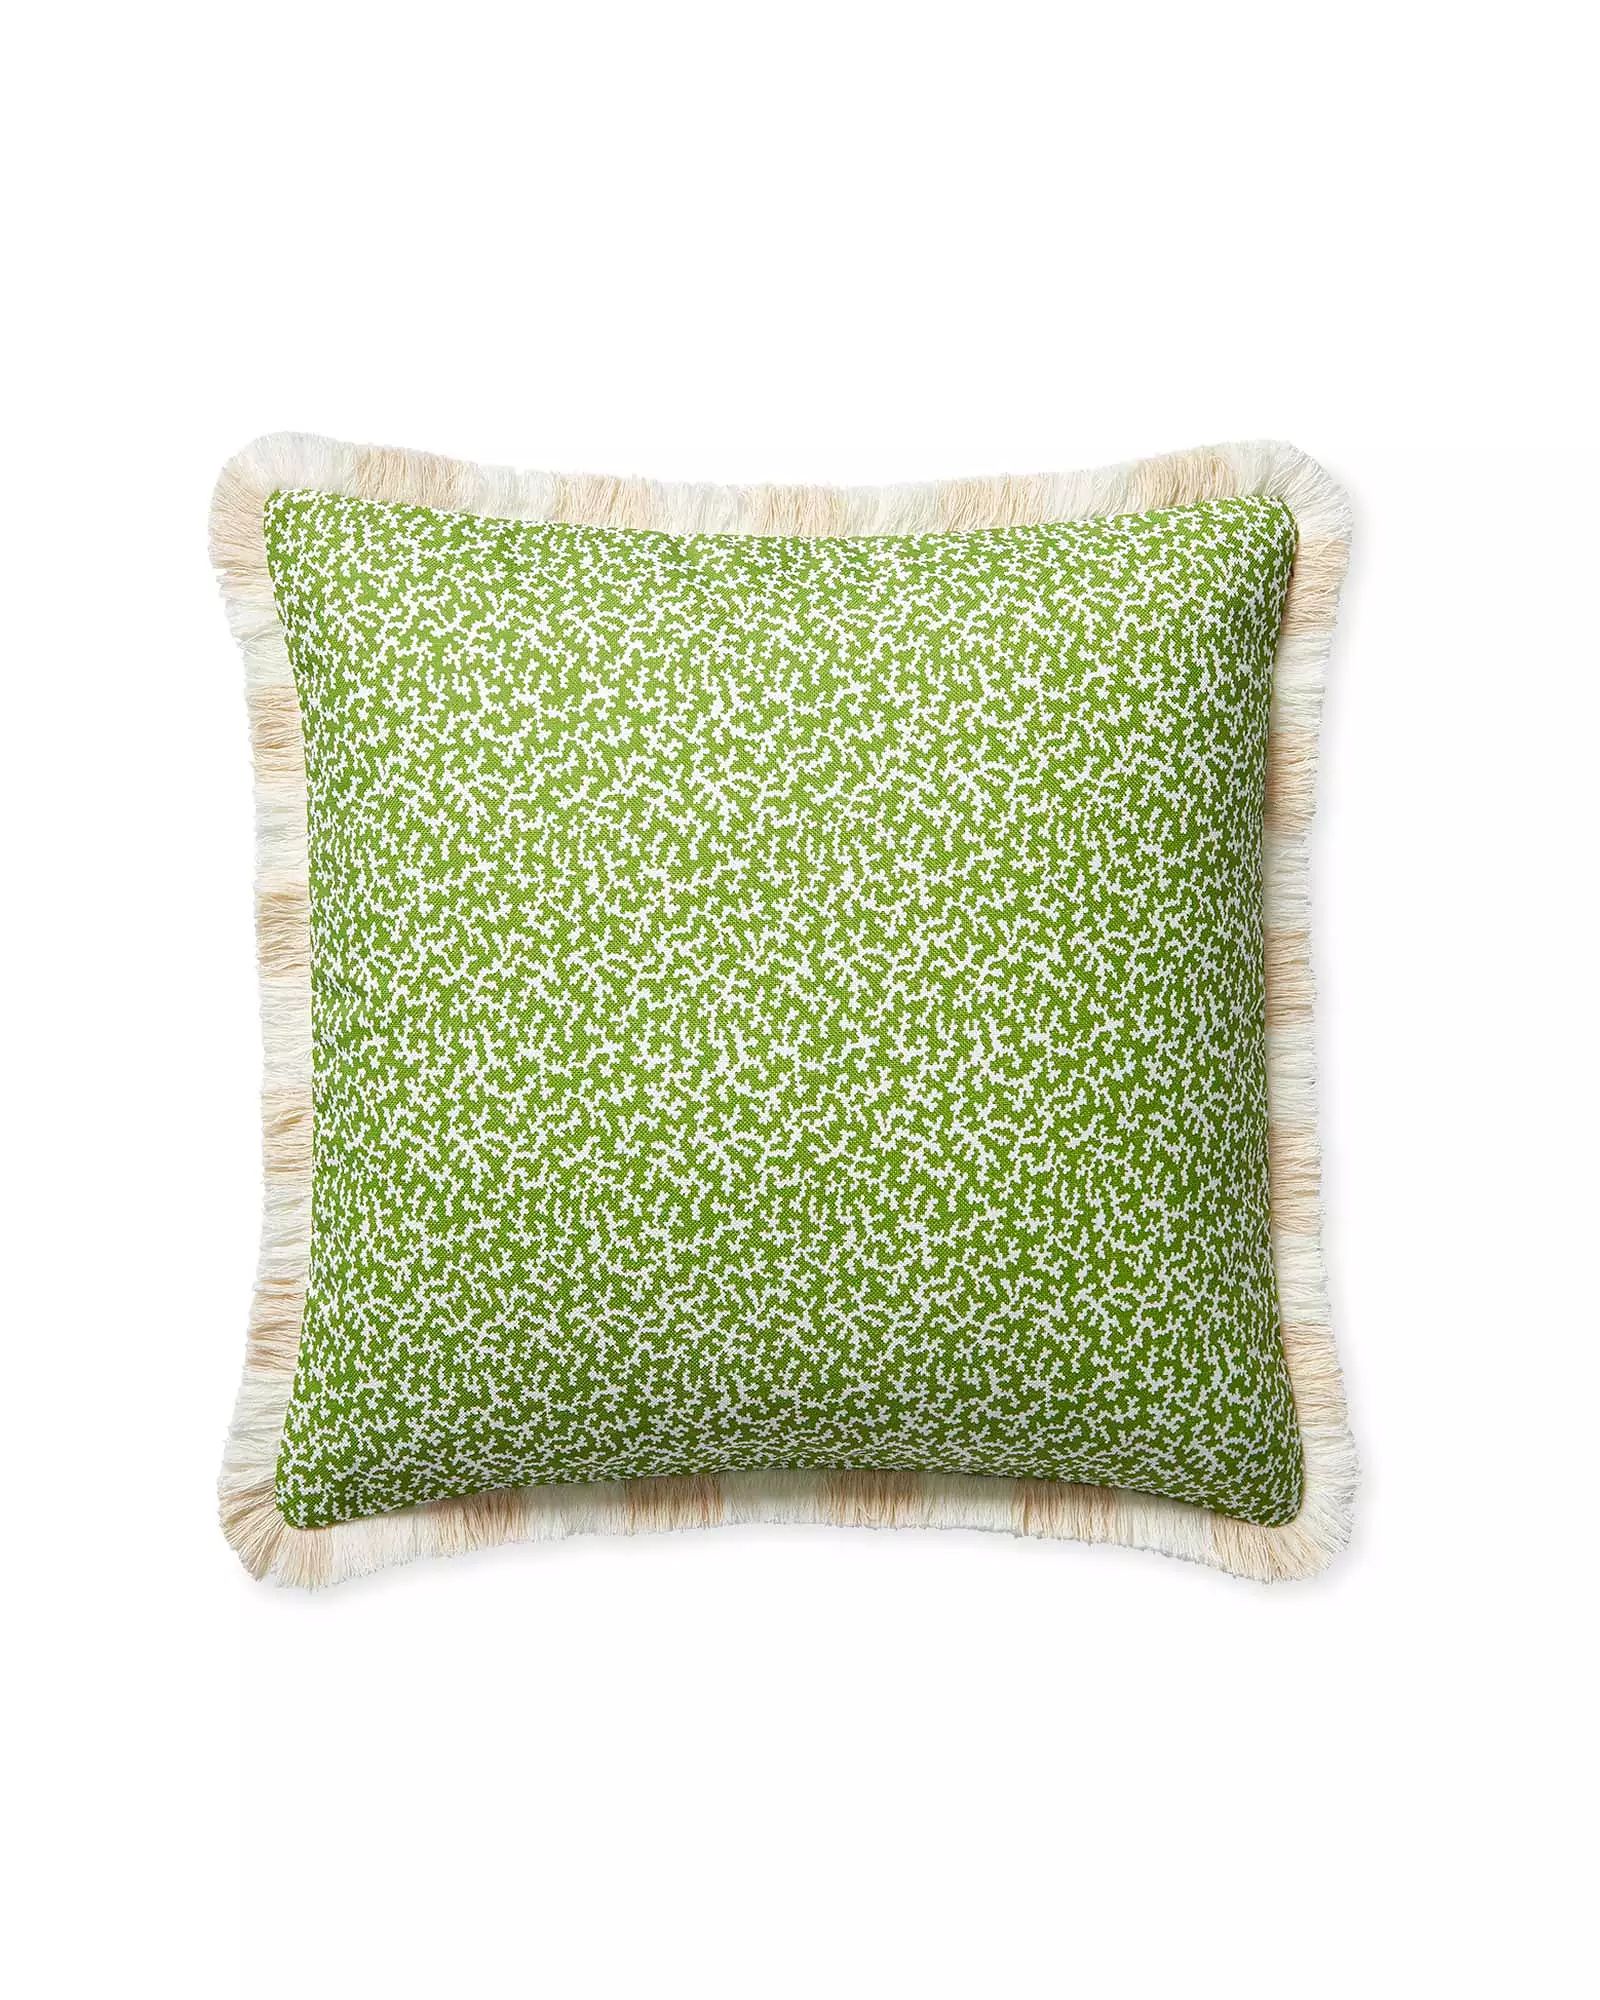 Reef Pillow Cover | Serena and Lily